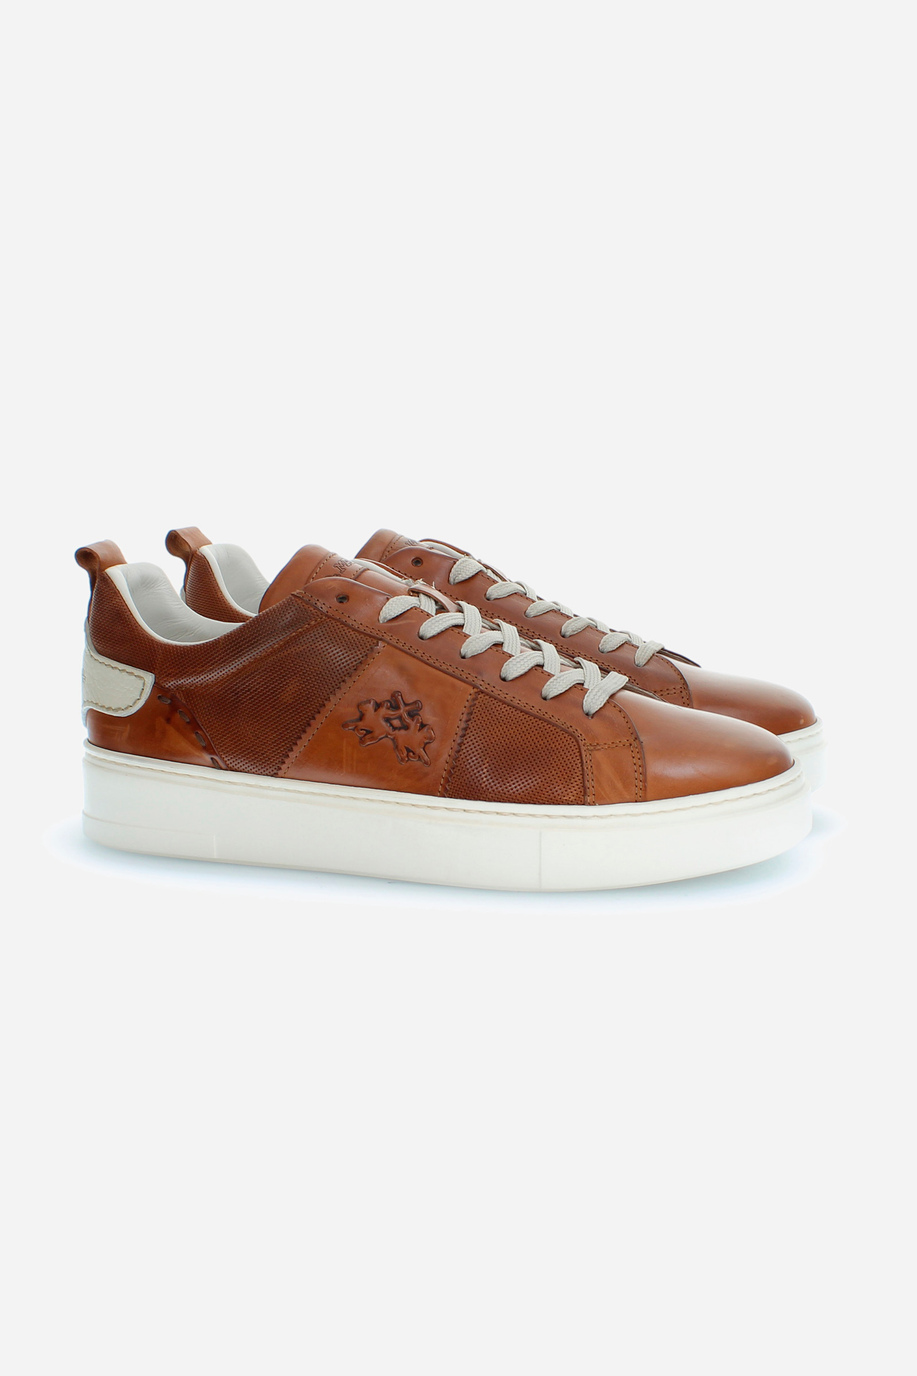 Men's leather trainers with contrasting inserts - Footwear | La Martina - Official Online Shop